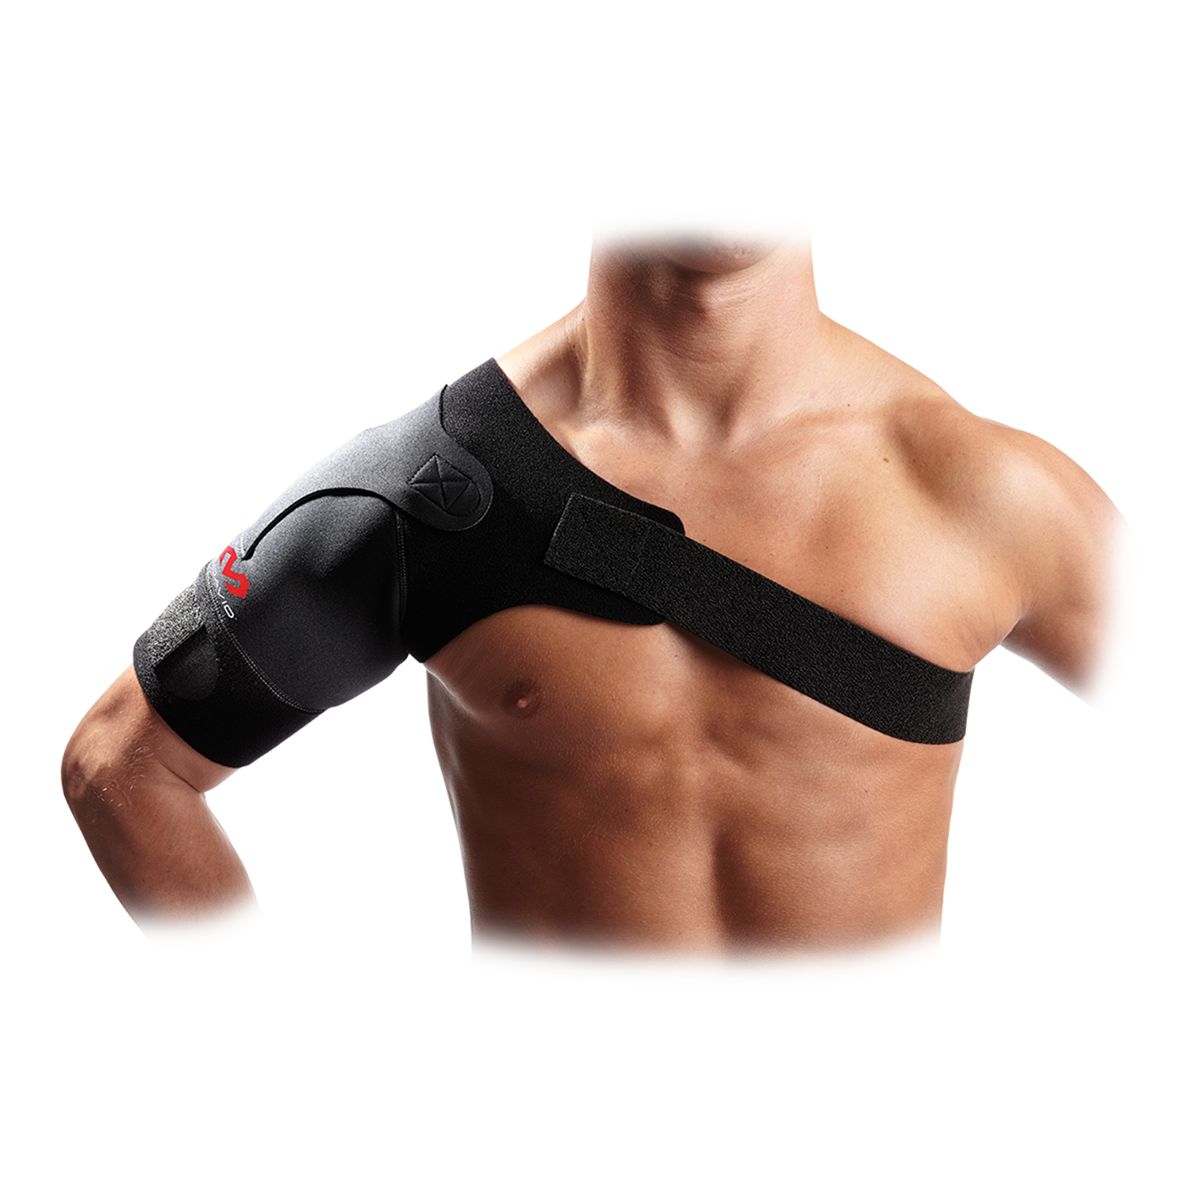 360 RELIEF Double Shoulder Support Compression Brace for Injuries and  Frozen Shoulder Pain Relief Protective Fleece With Mesh Laundry Bag -   Canada